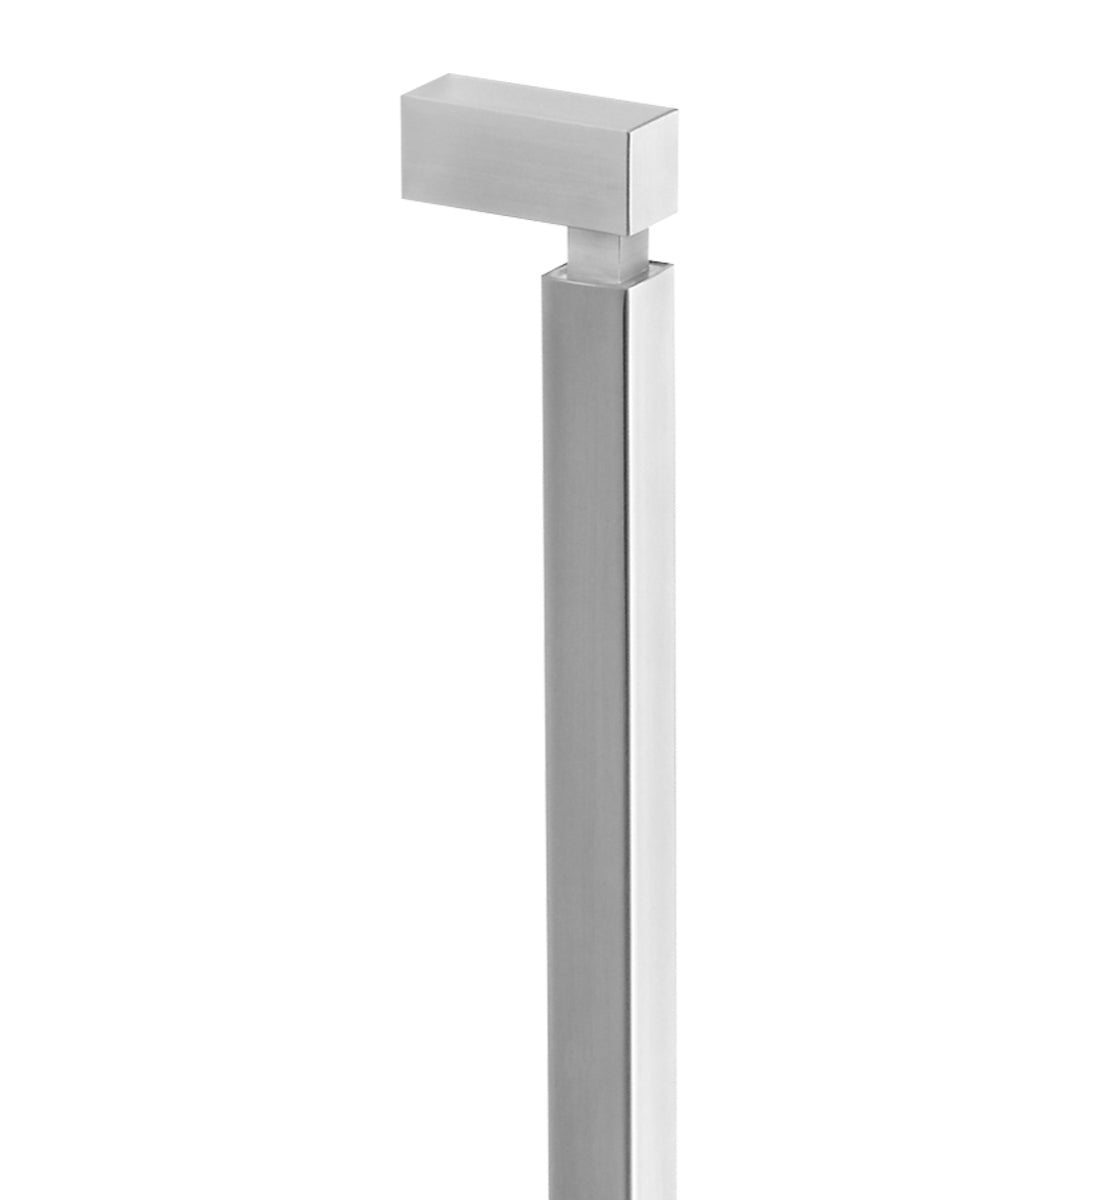 8170 Single Entrance Handle, Rear Disk Fix, 832mm x 32mm, CTC 800mm in Satin Stainless